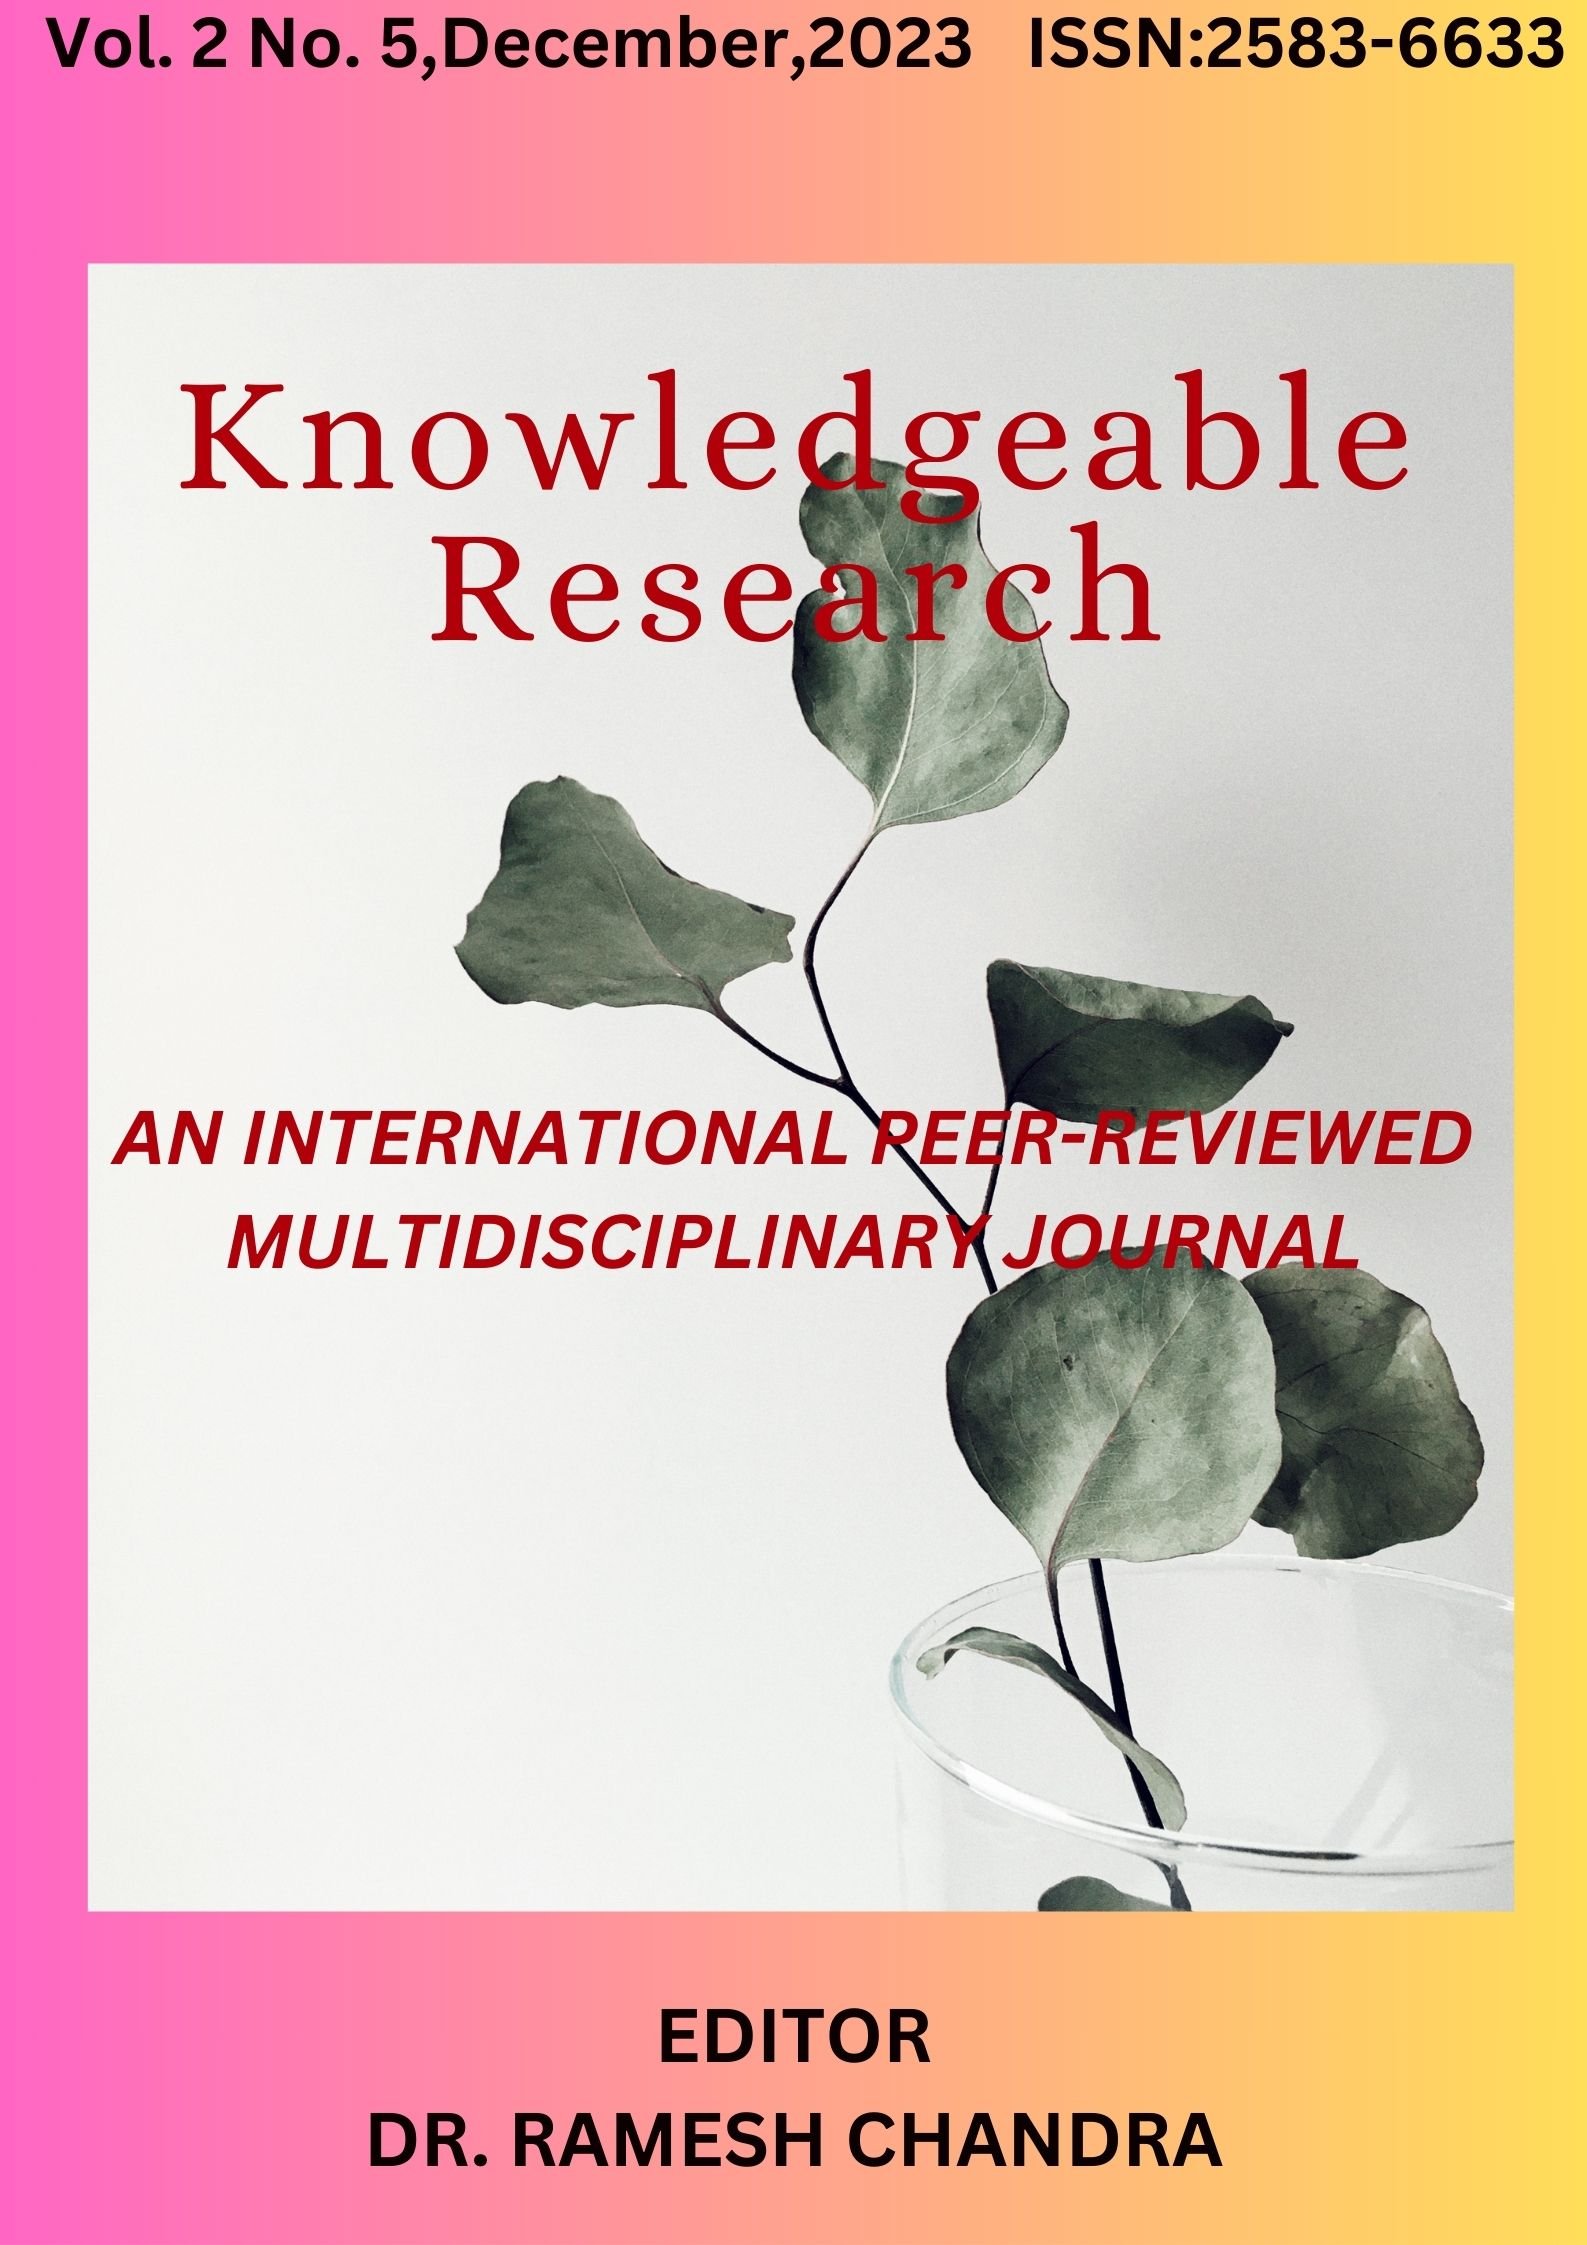 					View Vol. 2 No. 05 (2023): Knowledgeable Research, Vol.02., No.05.,2023
				